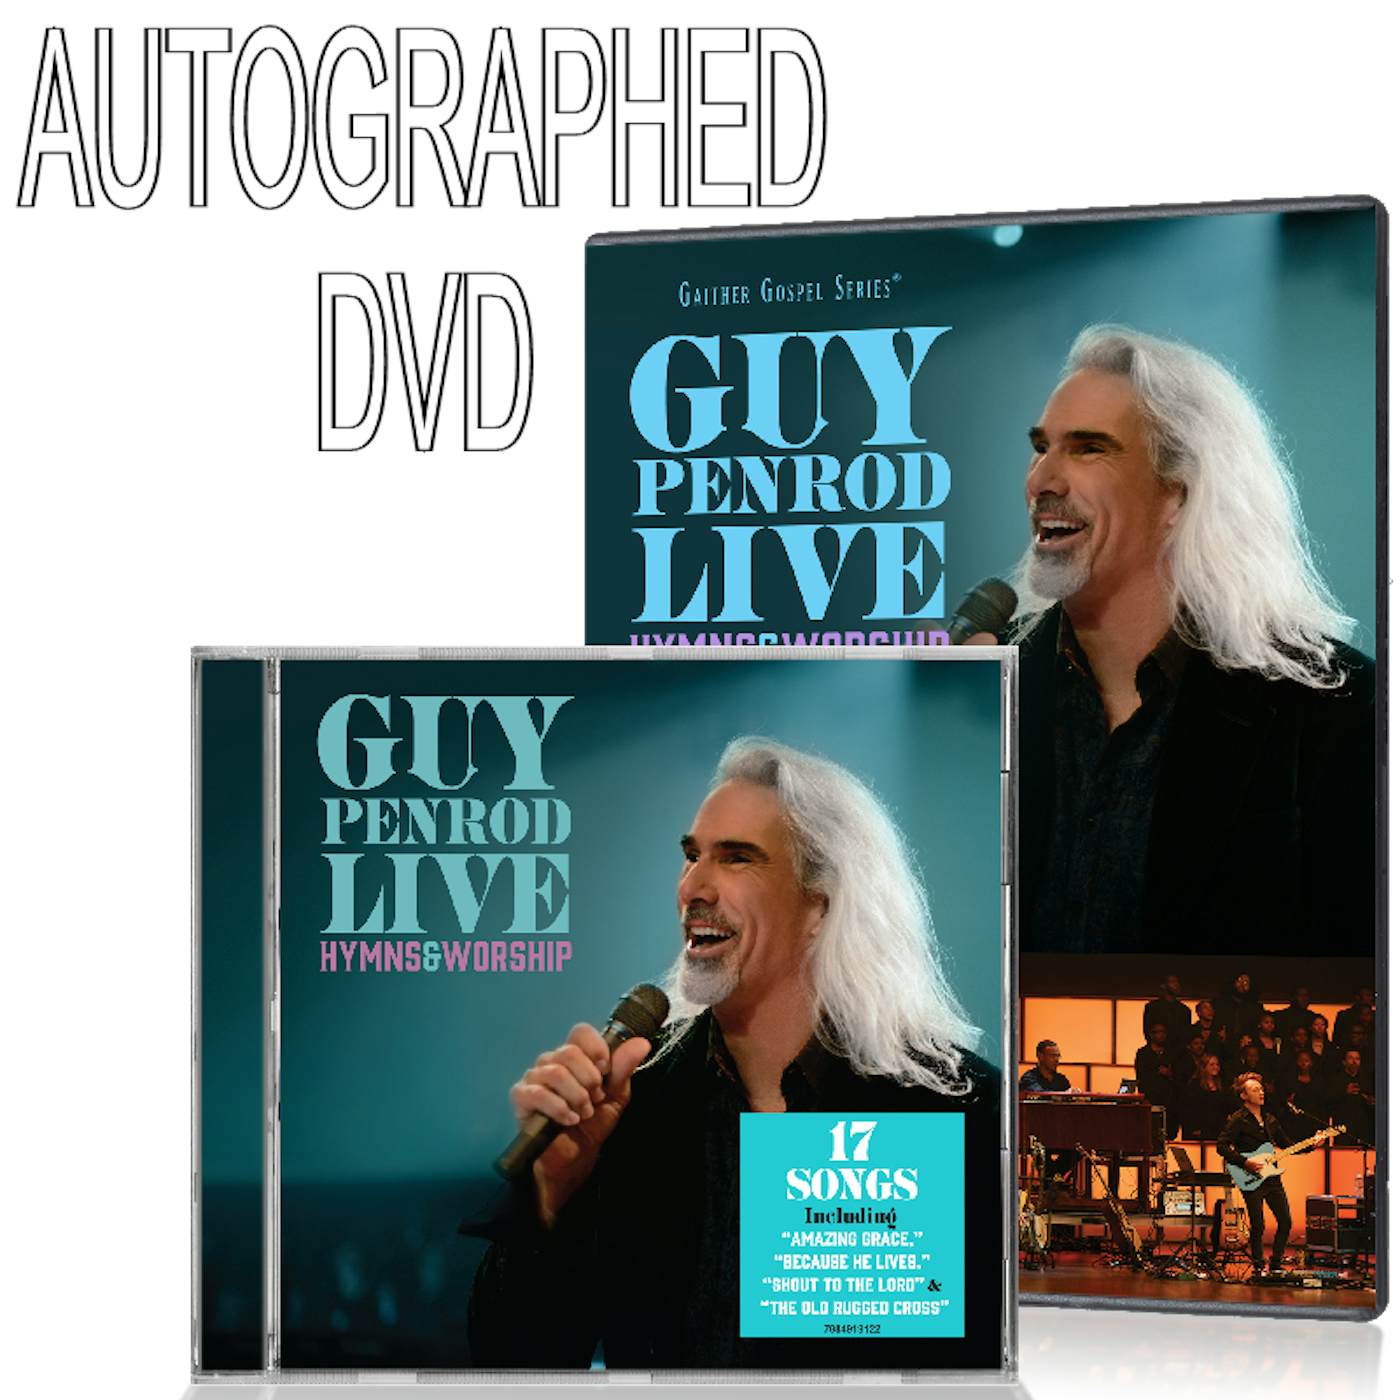 Guy Penrod LIVE DVD and CD Combo